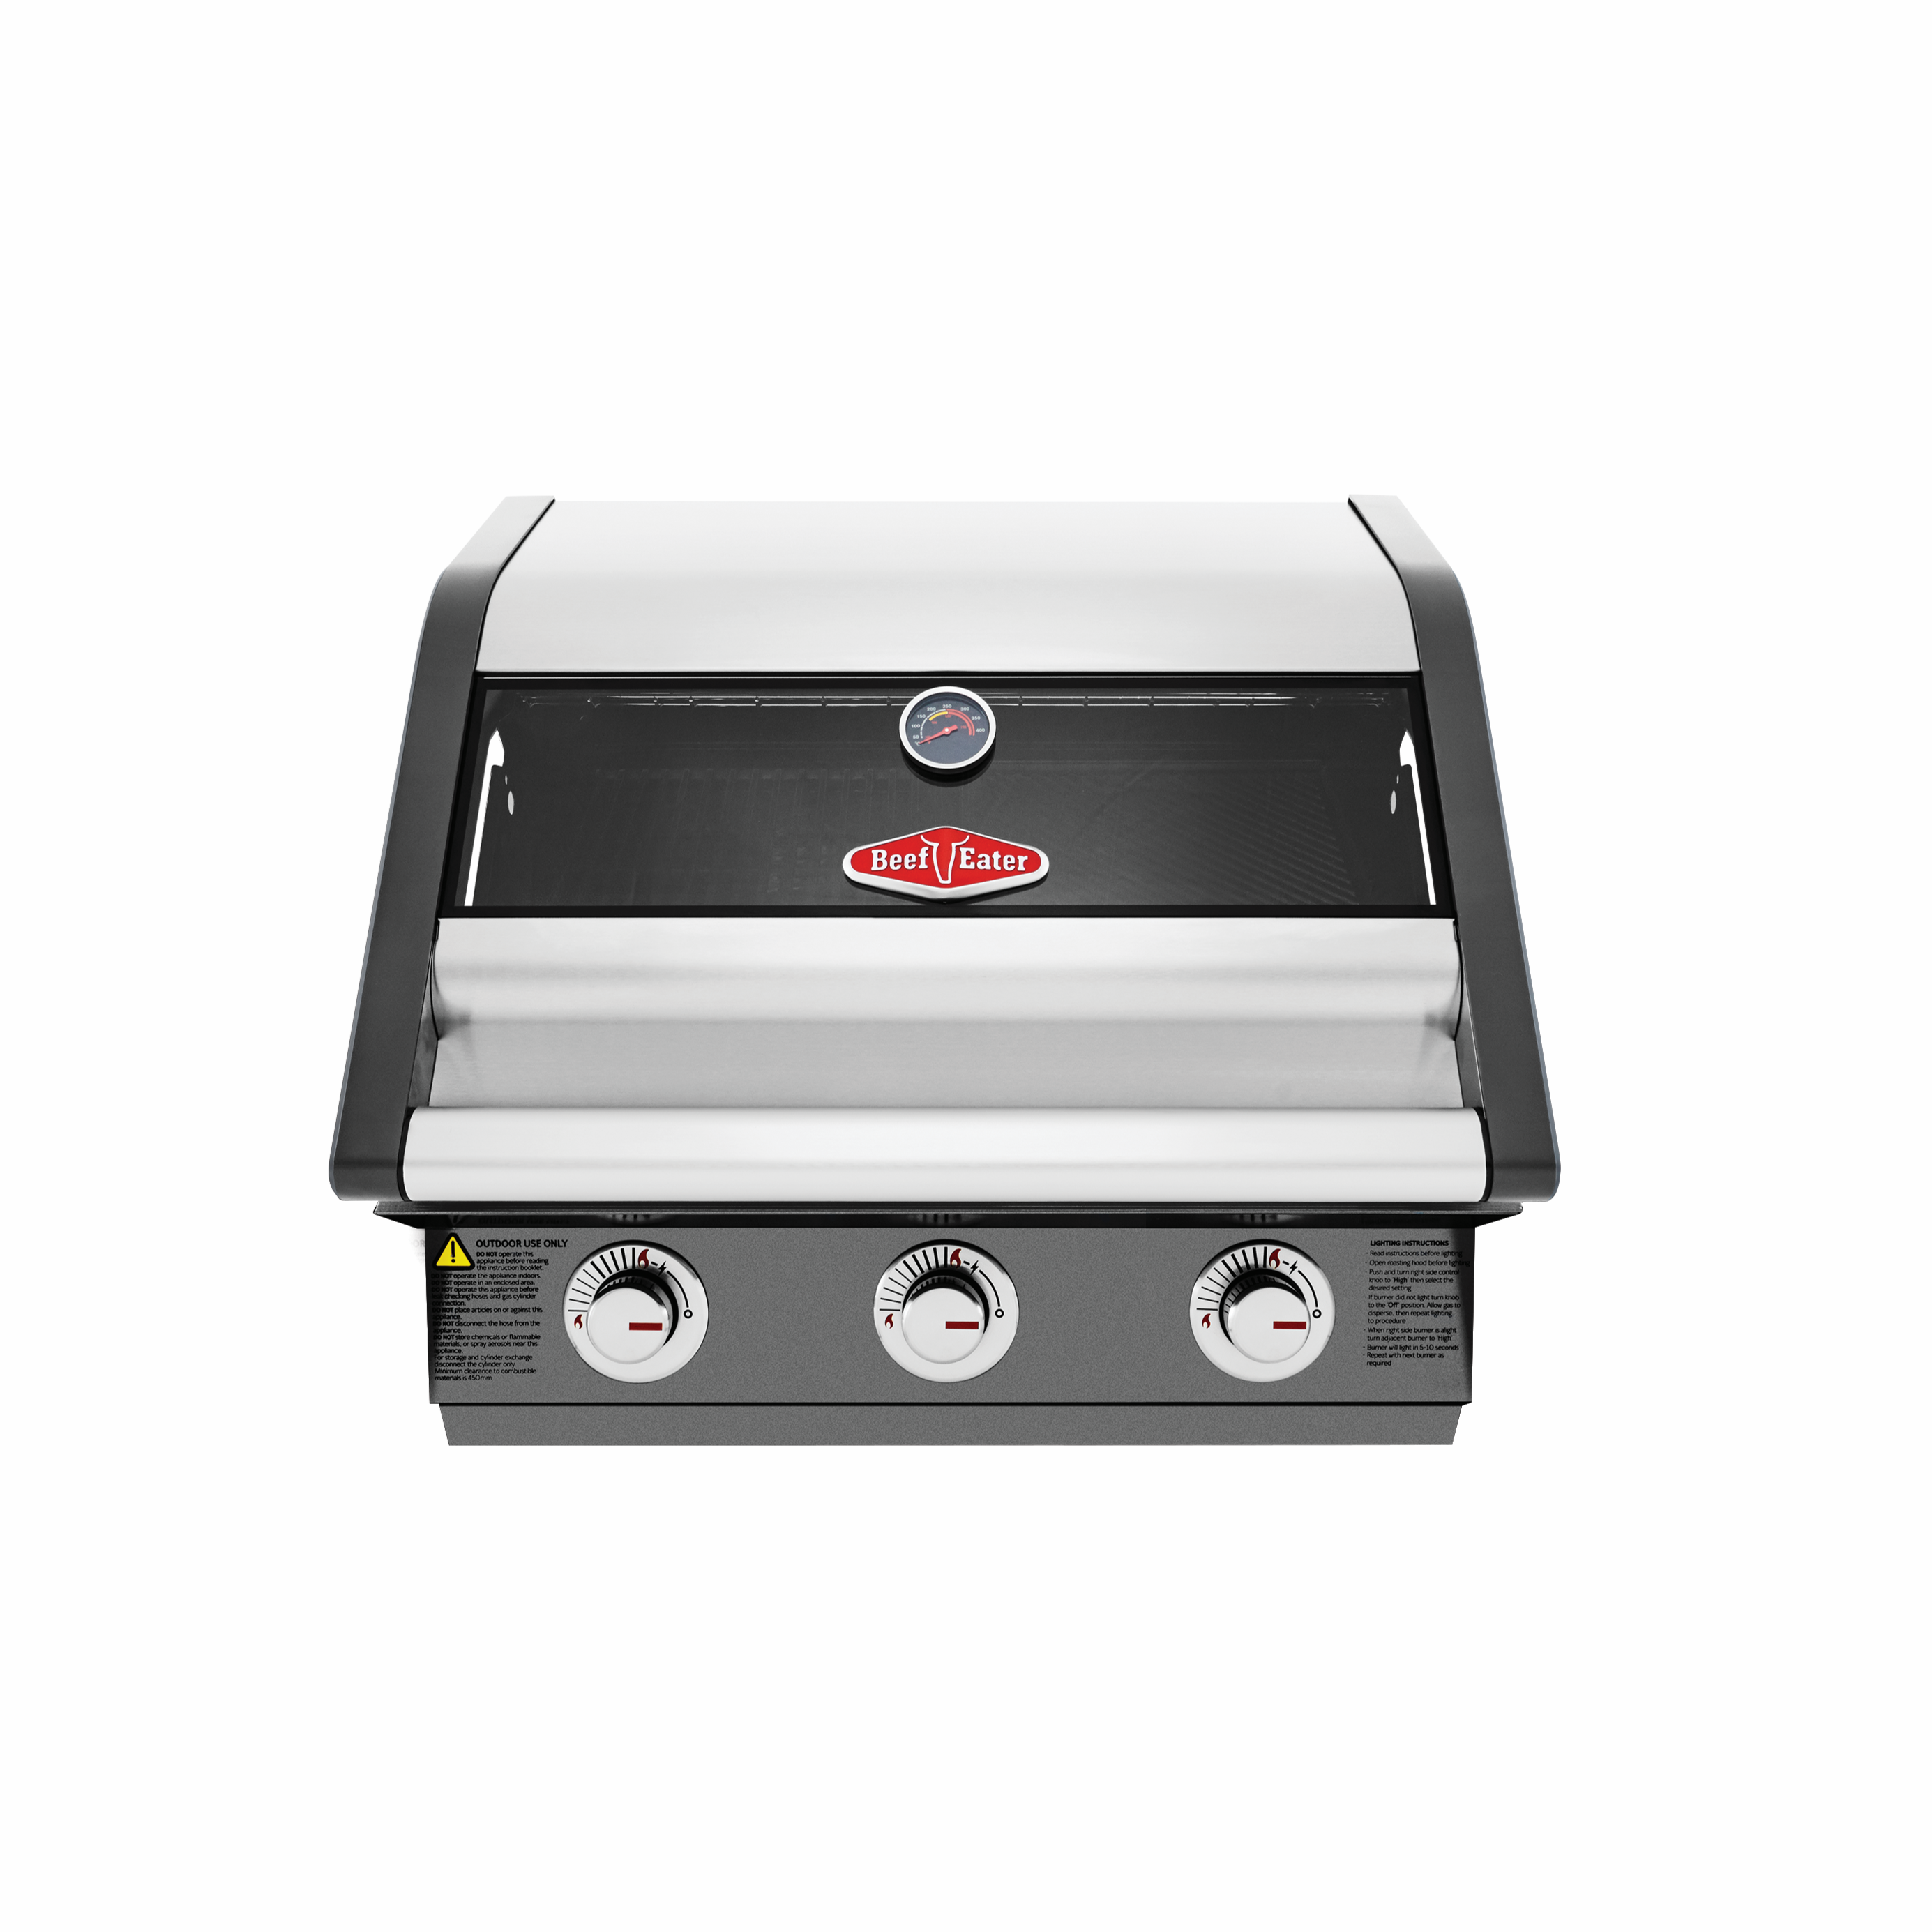 BeefEater - 1600E Series 3 Burner Built In Barbecue